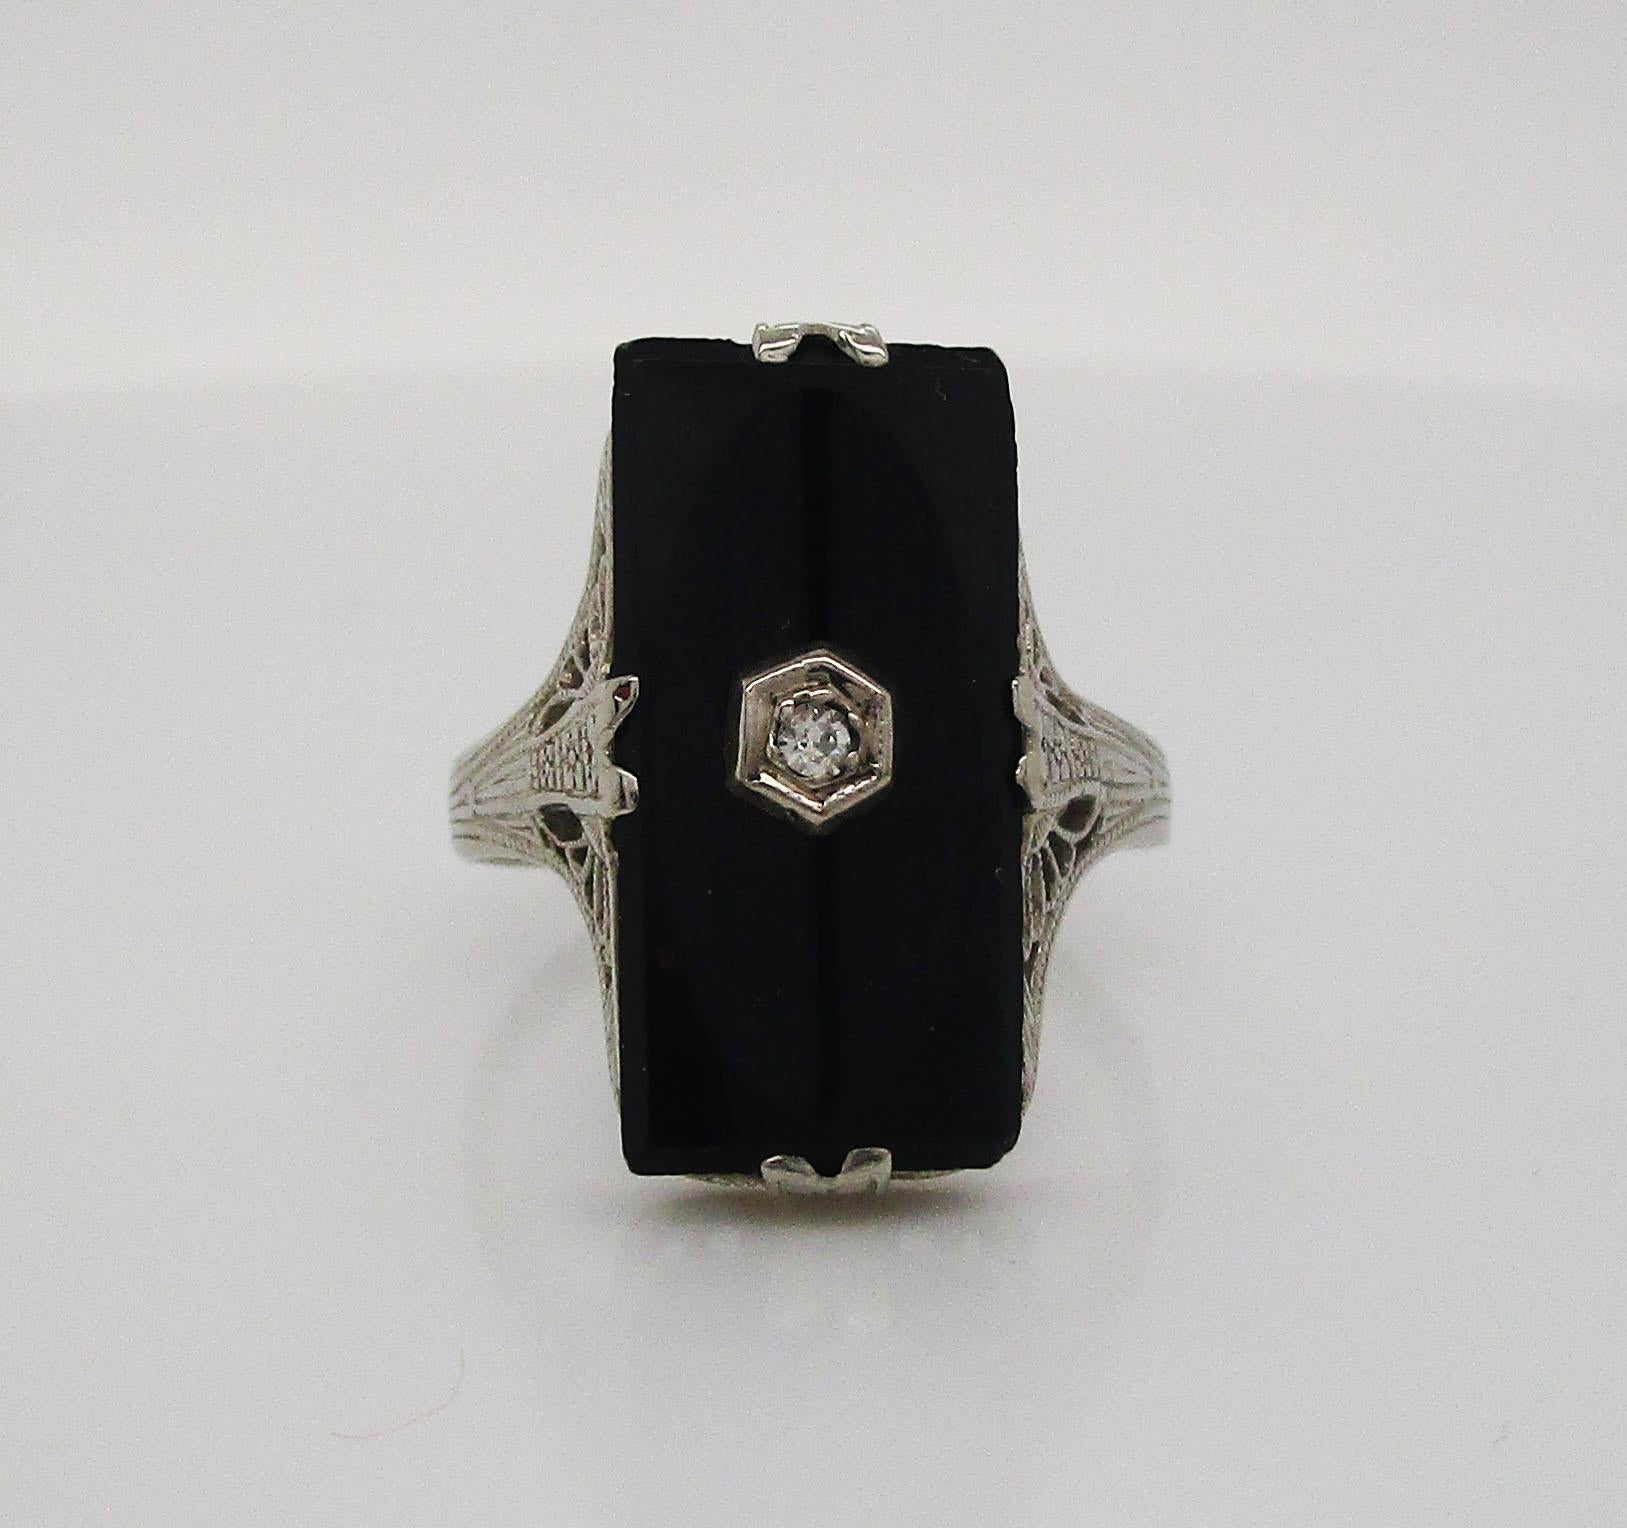 This absolutely beautiful Art Deco ring is in 14k white gold with delicate filigree details framing a black onyx center set with a stunning white diamond. The long north-to-south layout of the ring displays the dramatic black onyx rectangle that